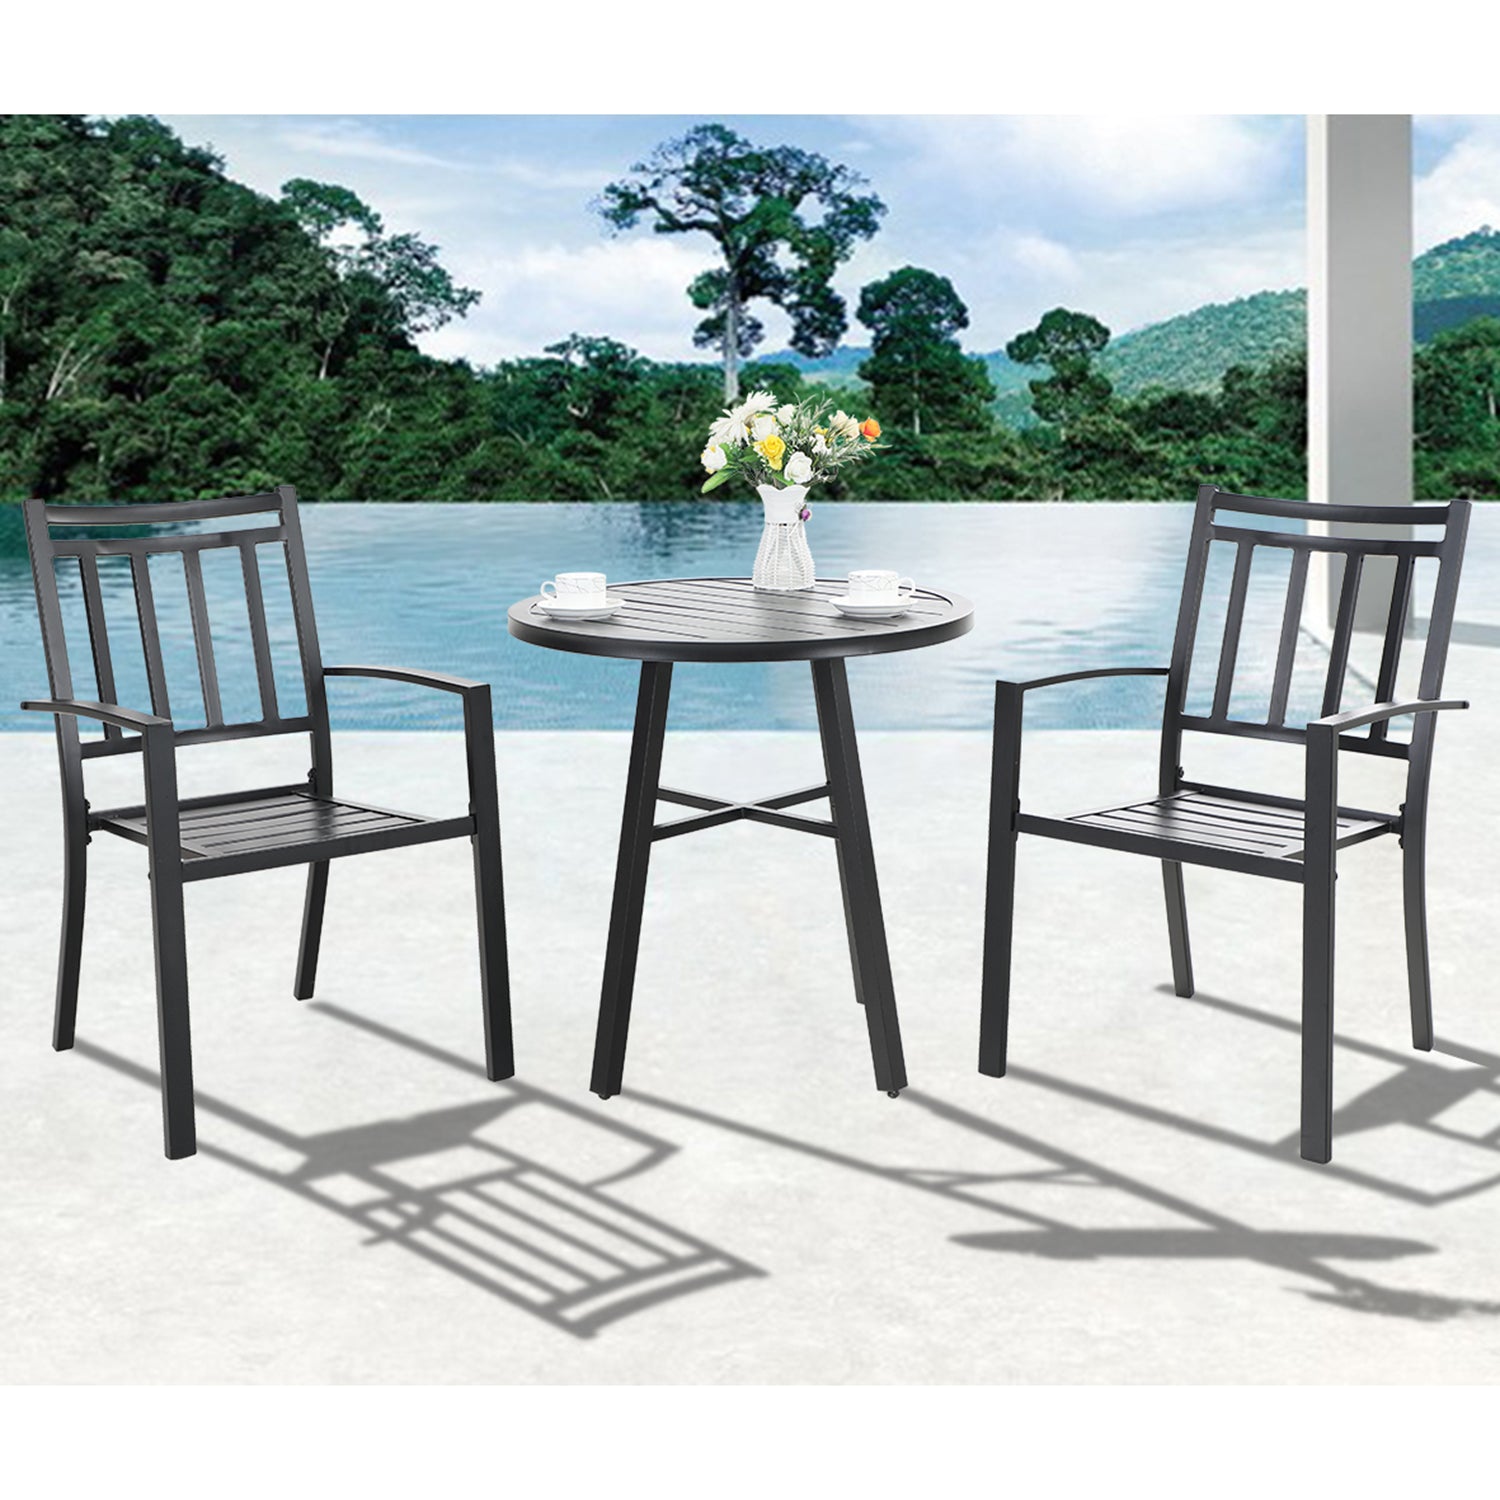 PHI VILLA Outdoor Metal Patio Bistro Set of 1 Round Table & Stackable Chairs